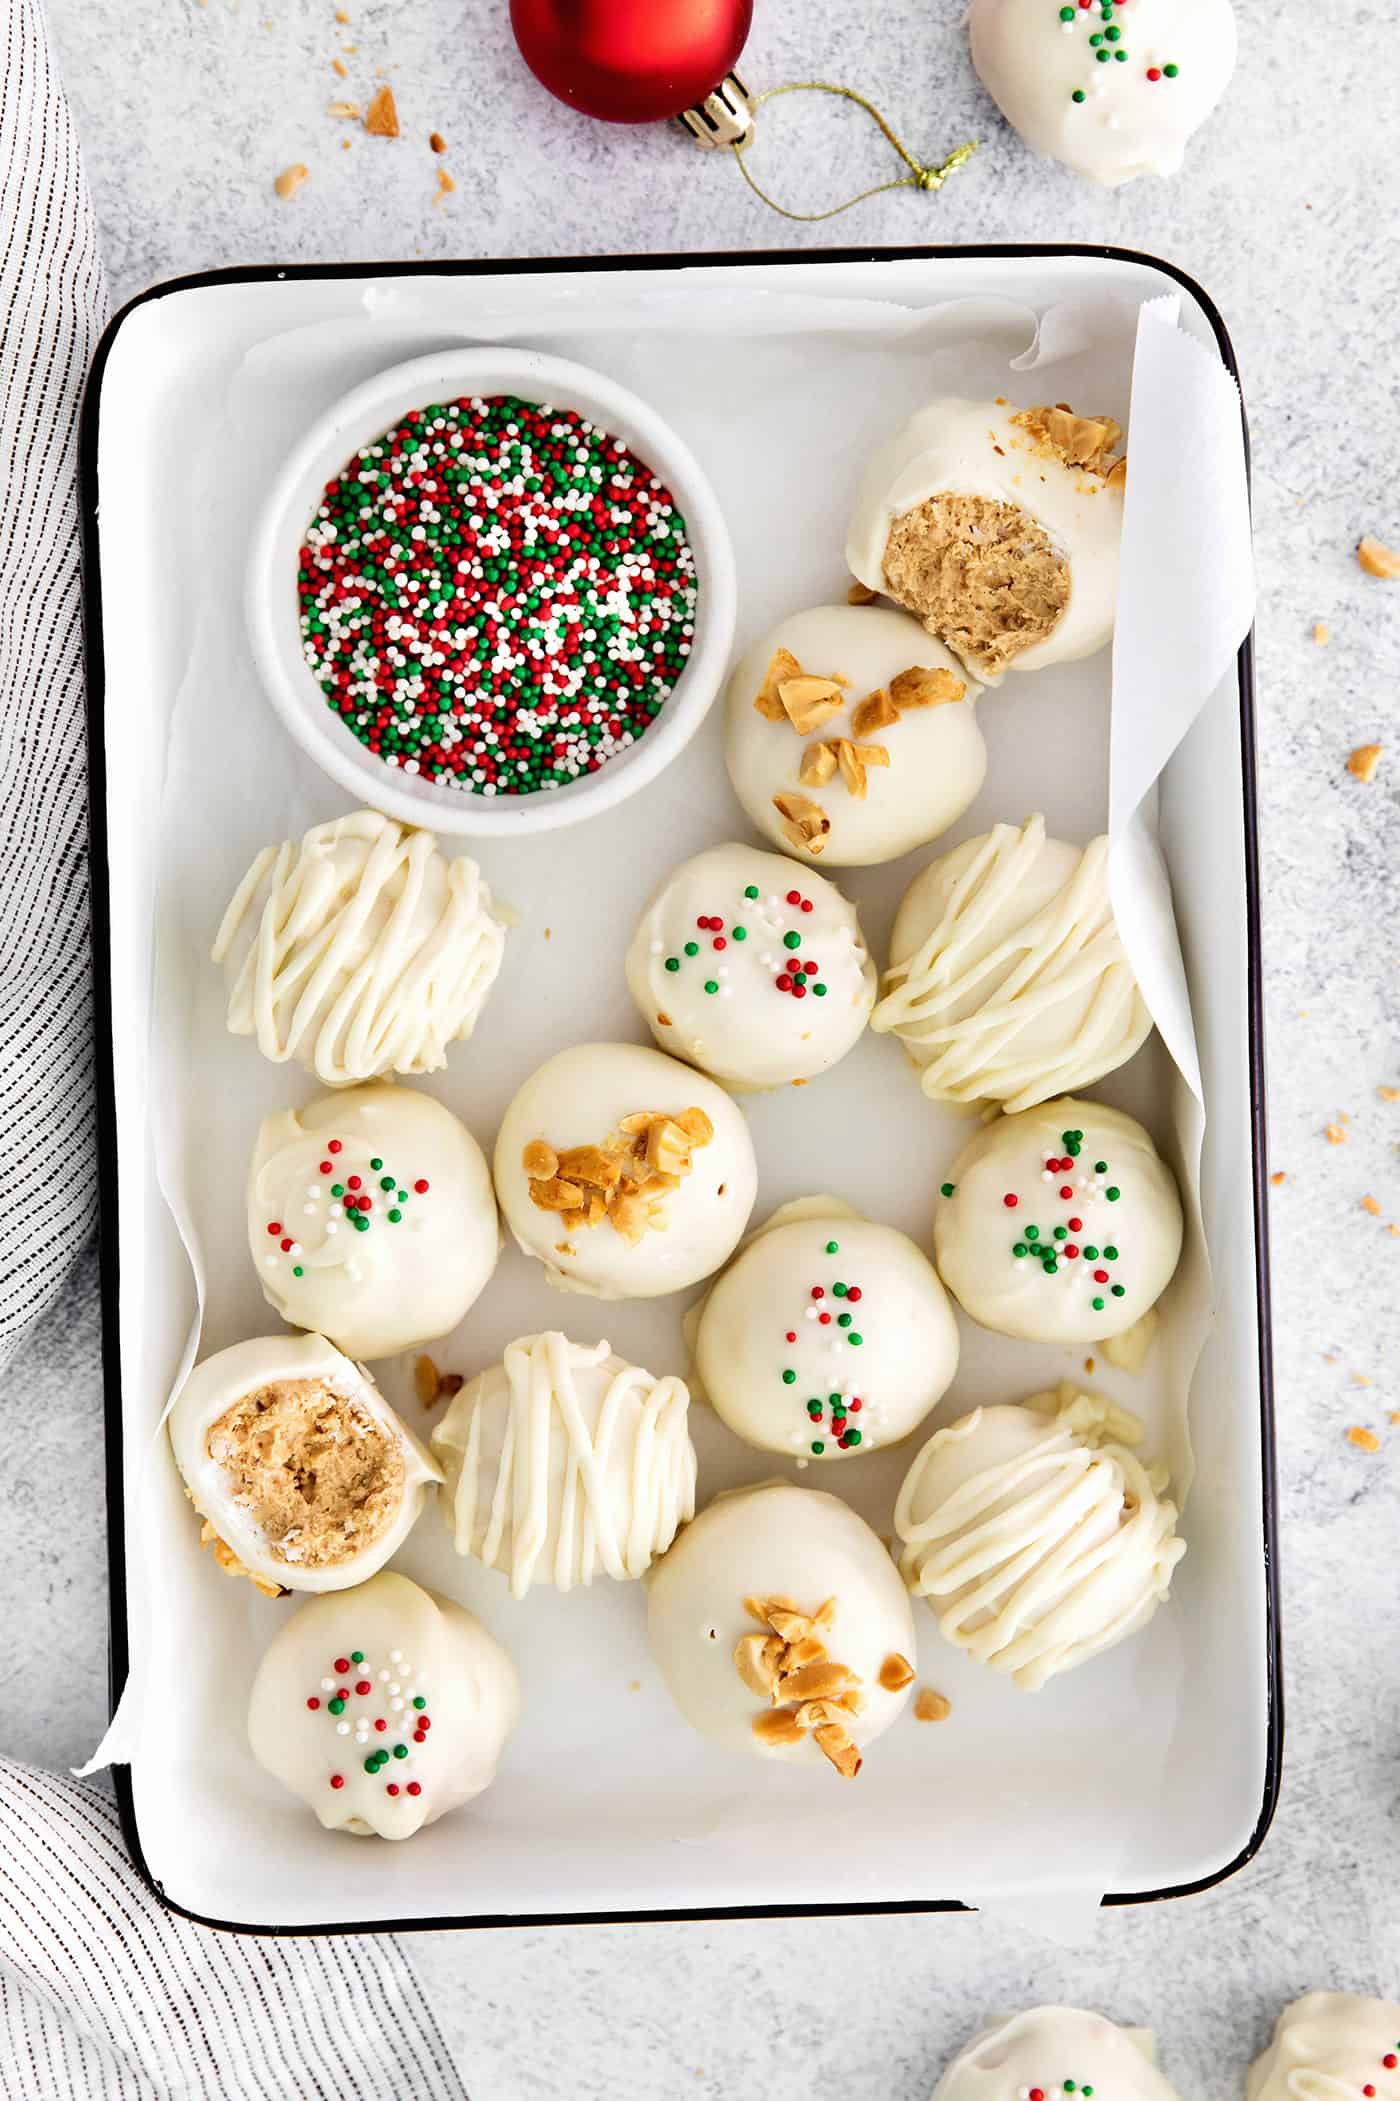 Overhead view of peanut butter balls with Christmas sprinkles